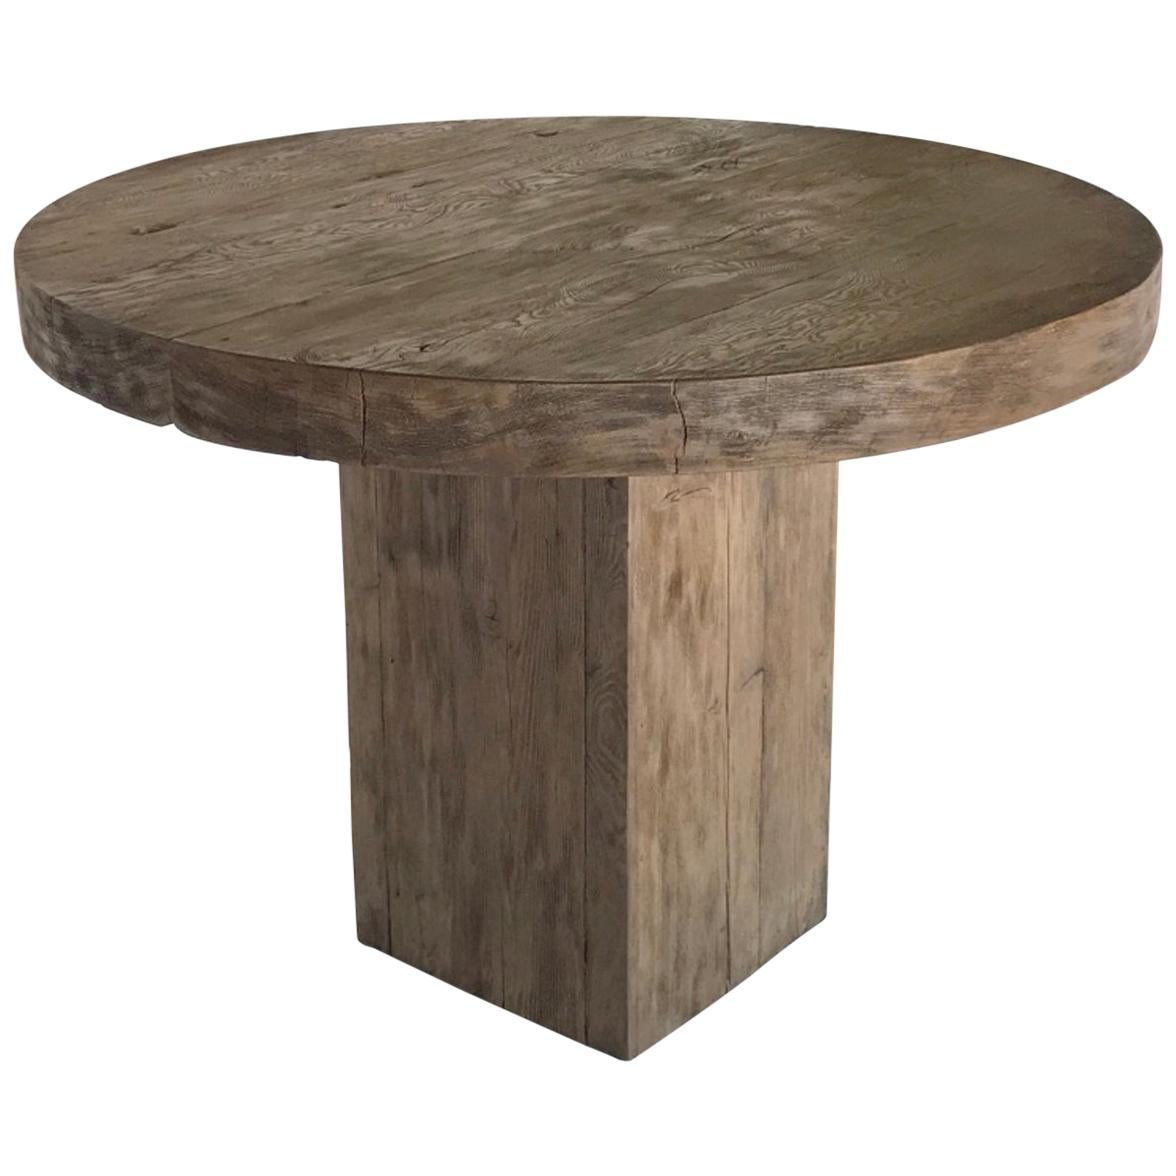 Rustic Modern Round Pedestal Table by Dos Gallos Studio